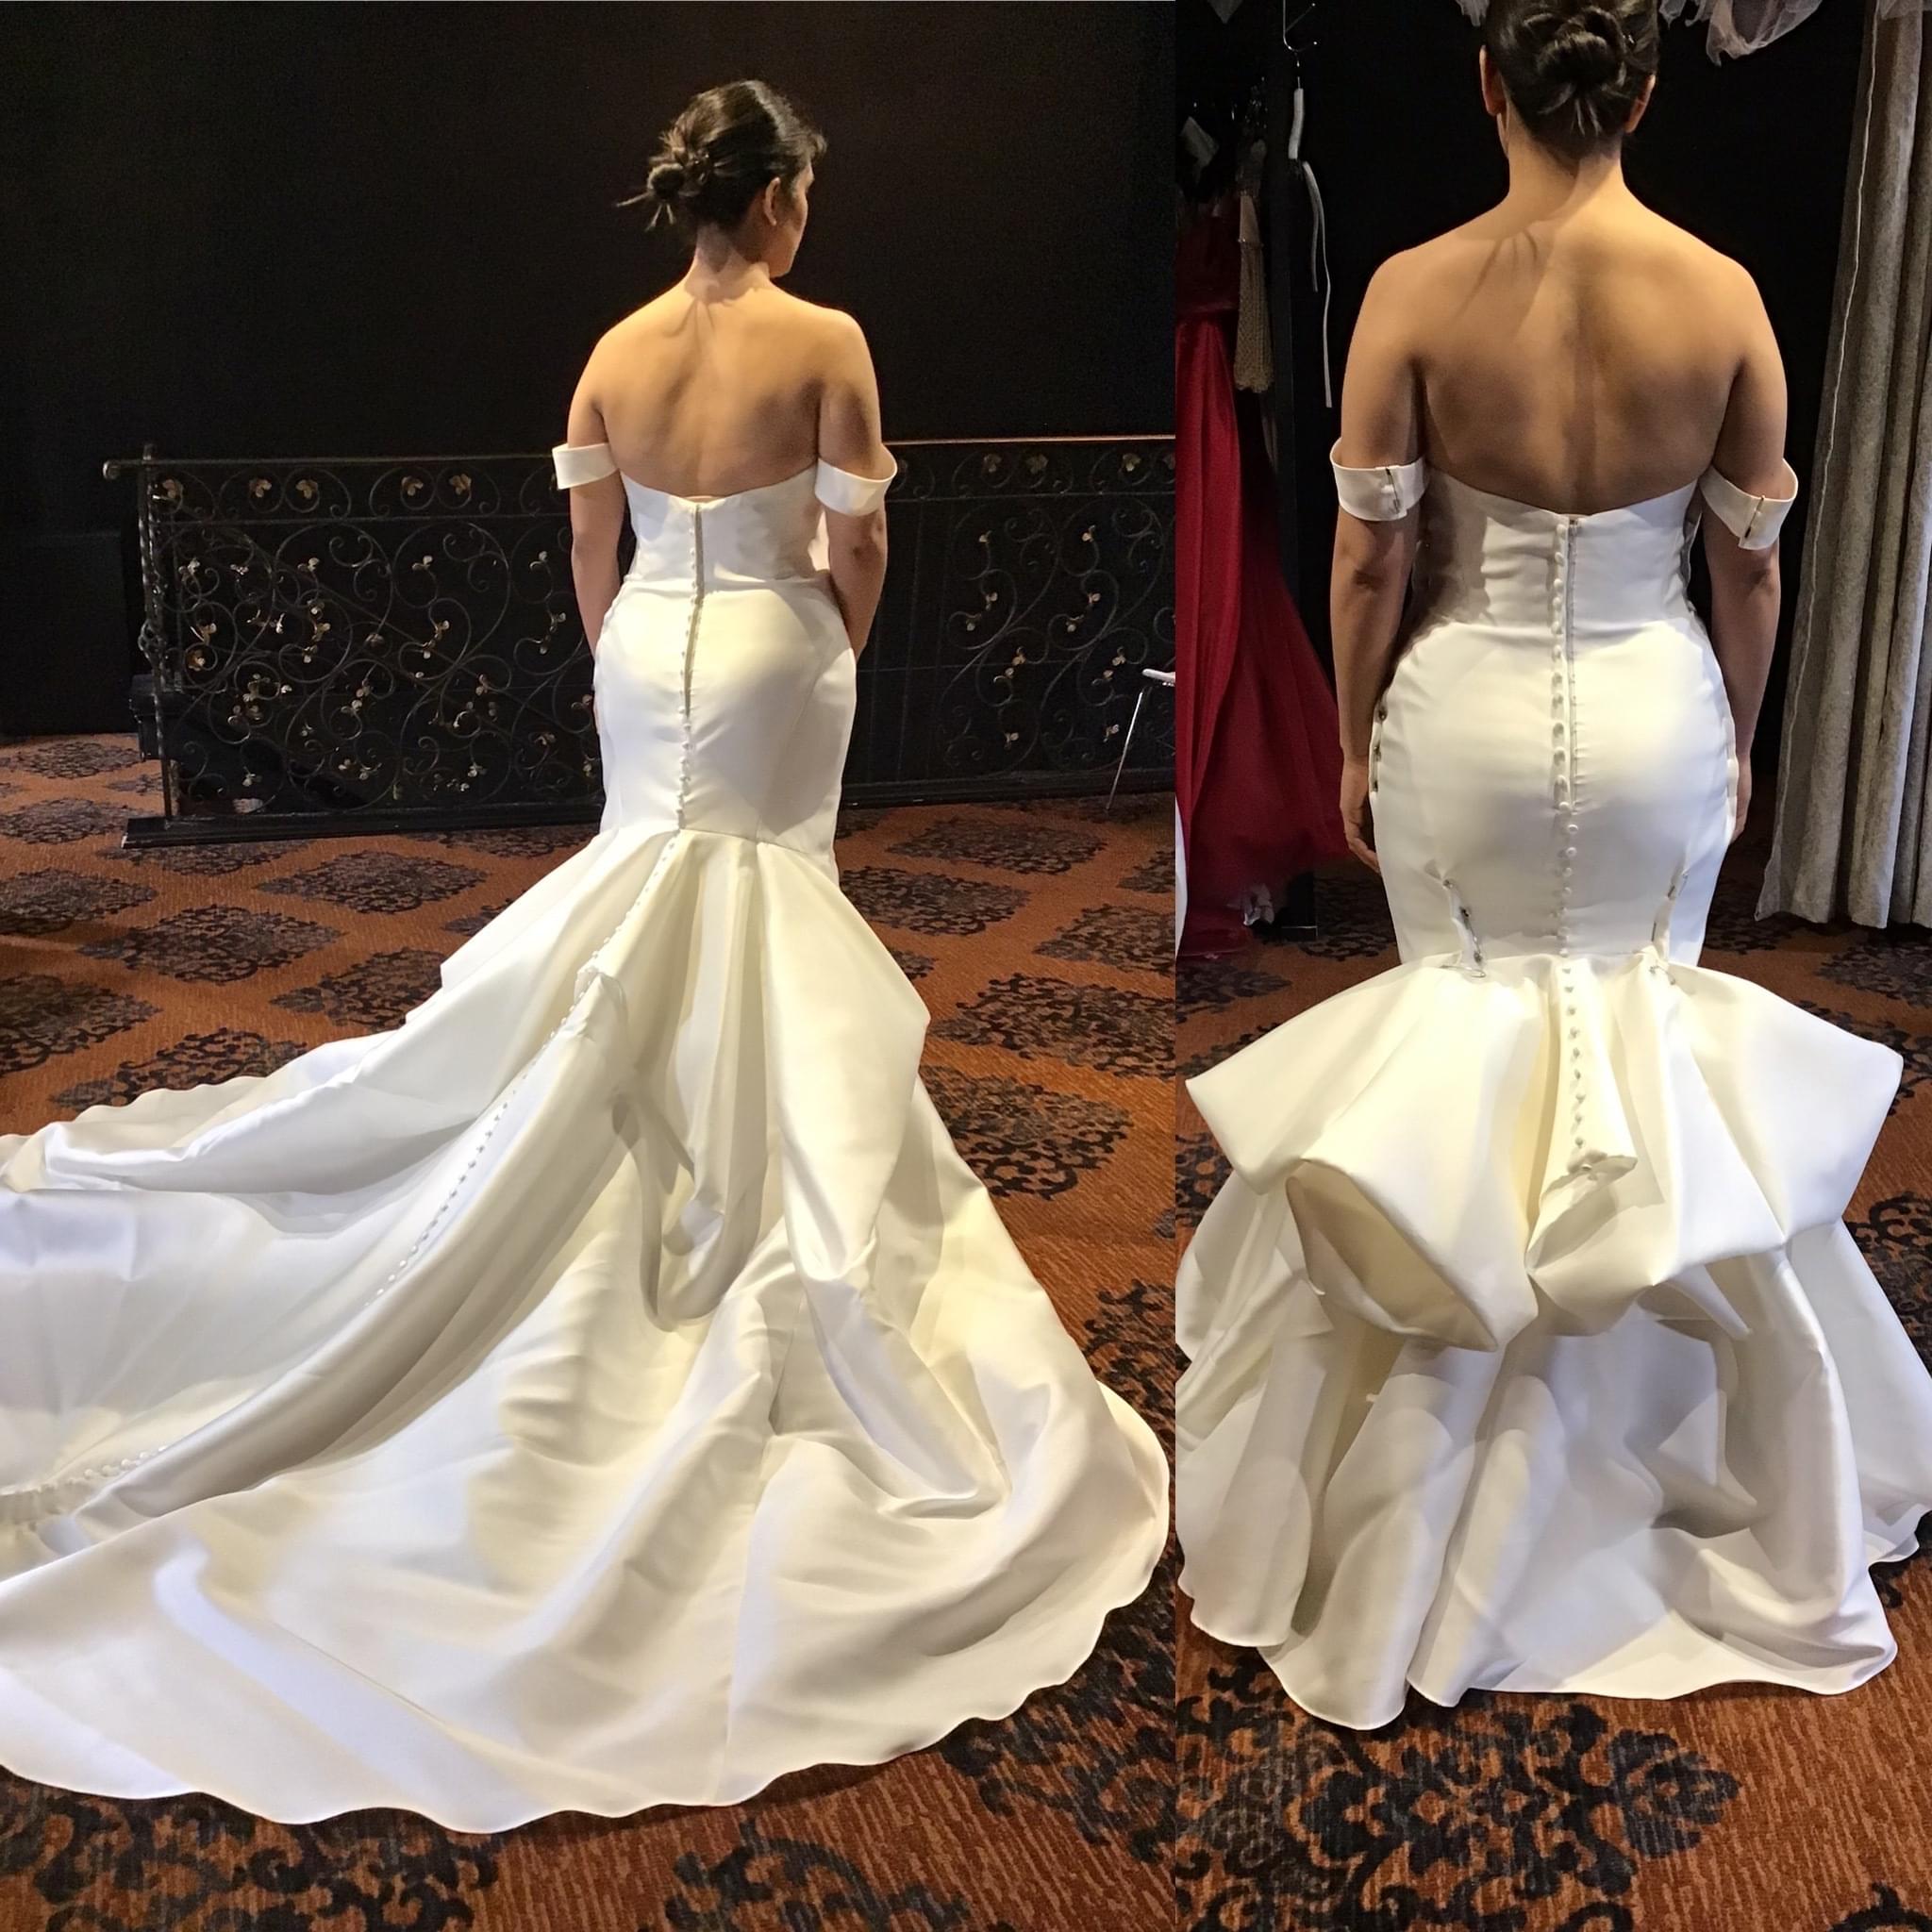 Before and after picture from wedding dress alterations all done.